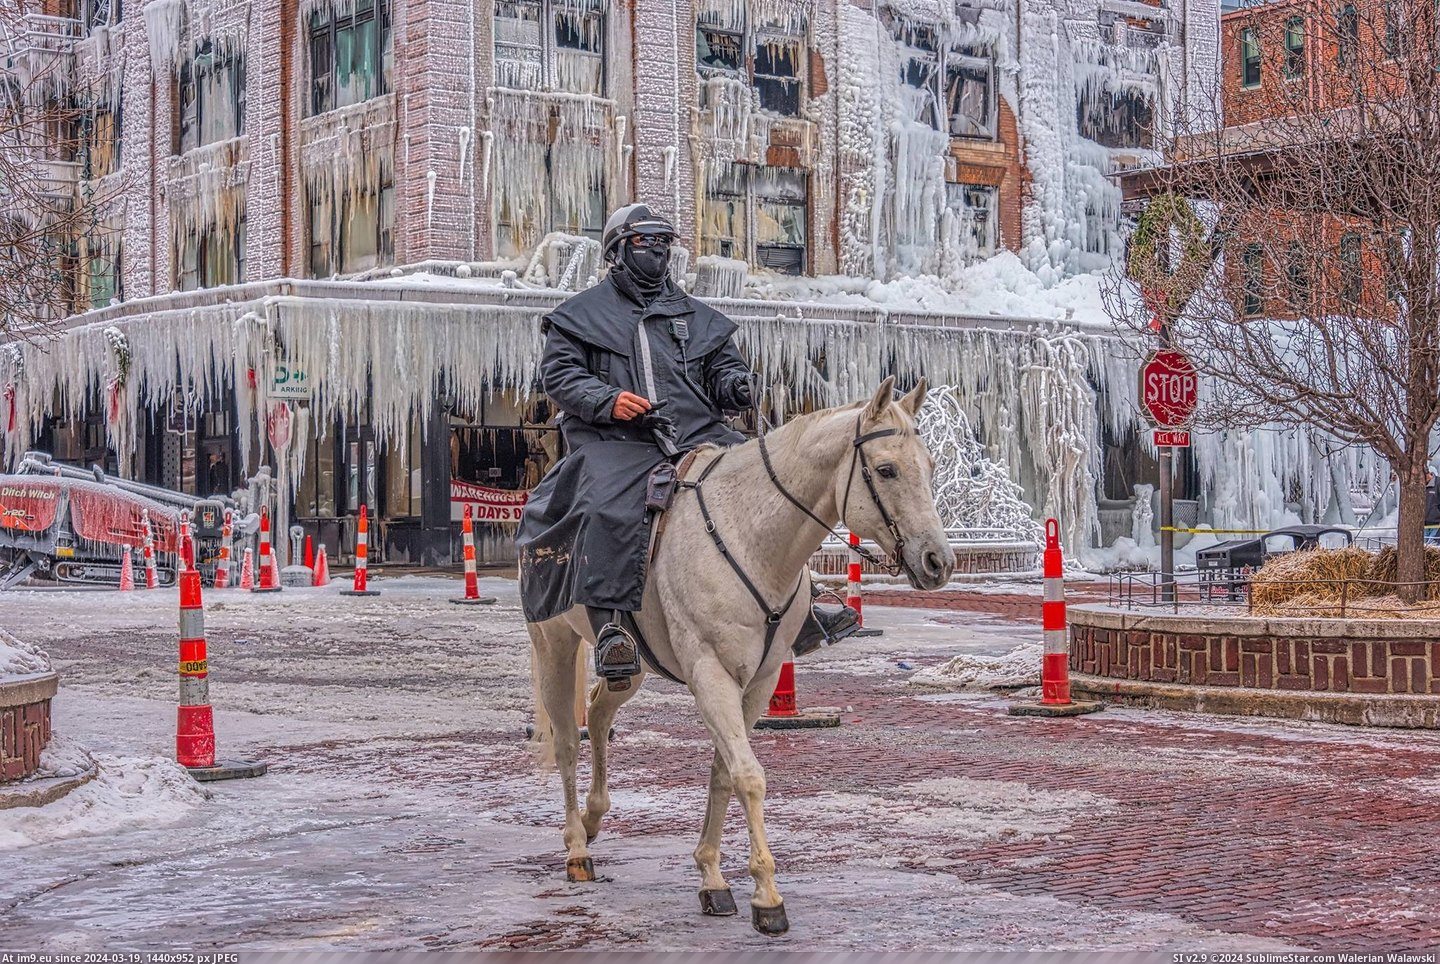 #Morning #City #Fire #Pub #Omaha #Frozen #Officer #Rides [Pics] An officer on horseback rides through the frozen city of Omaha the morning after a pub fire Pic. (Image of album My r/PICS favs))